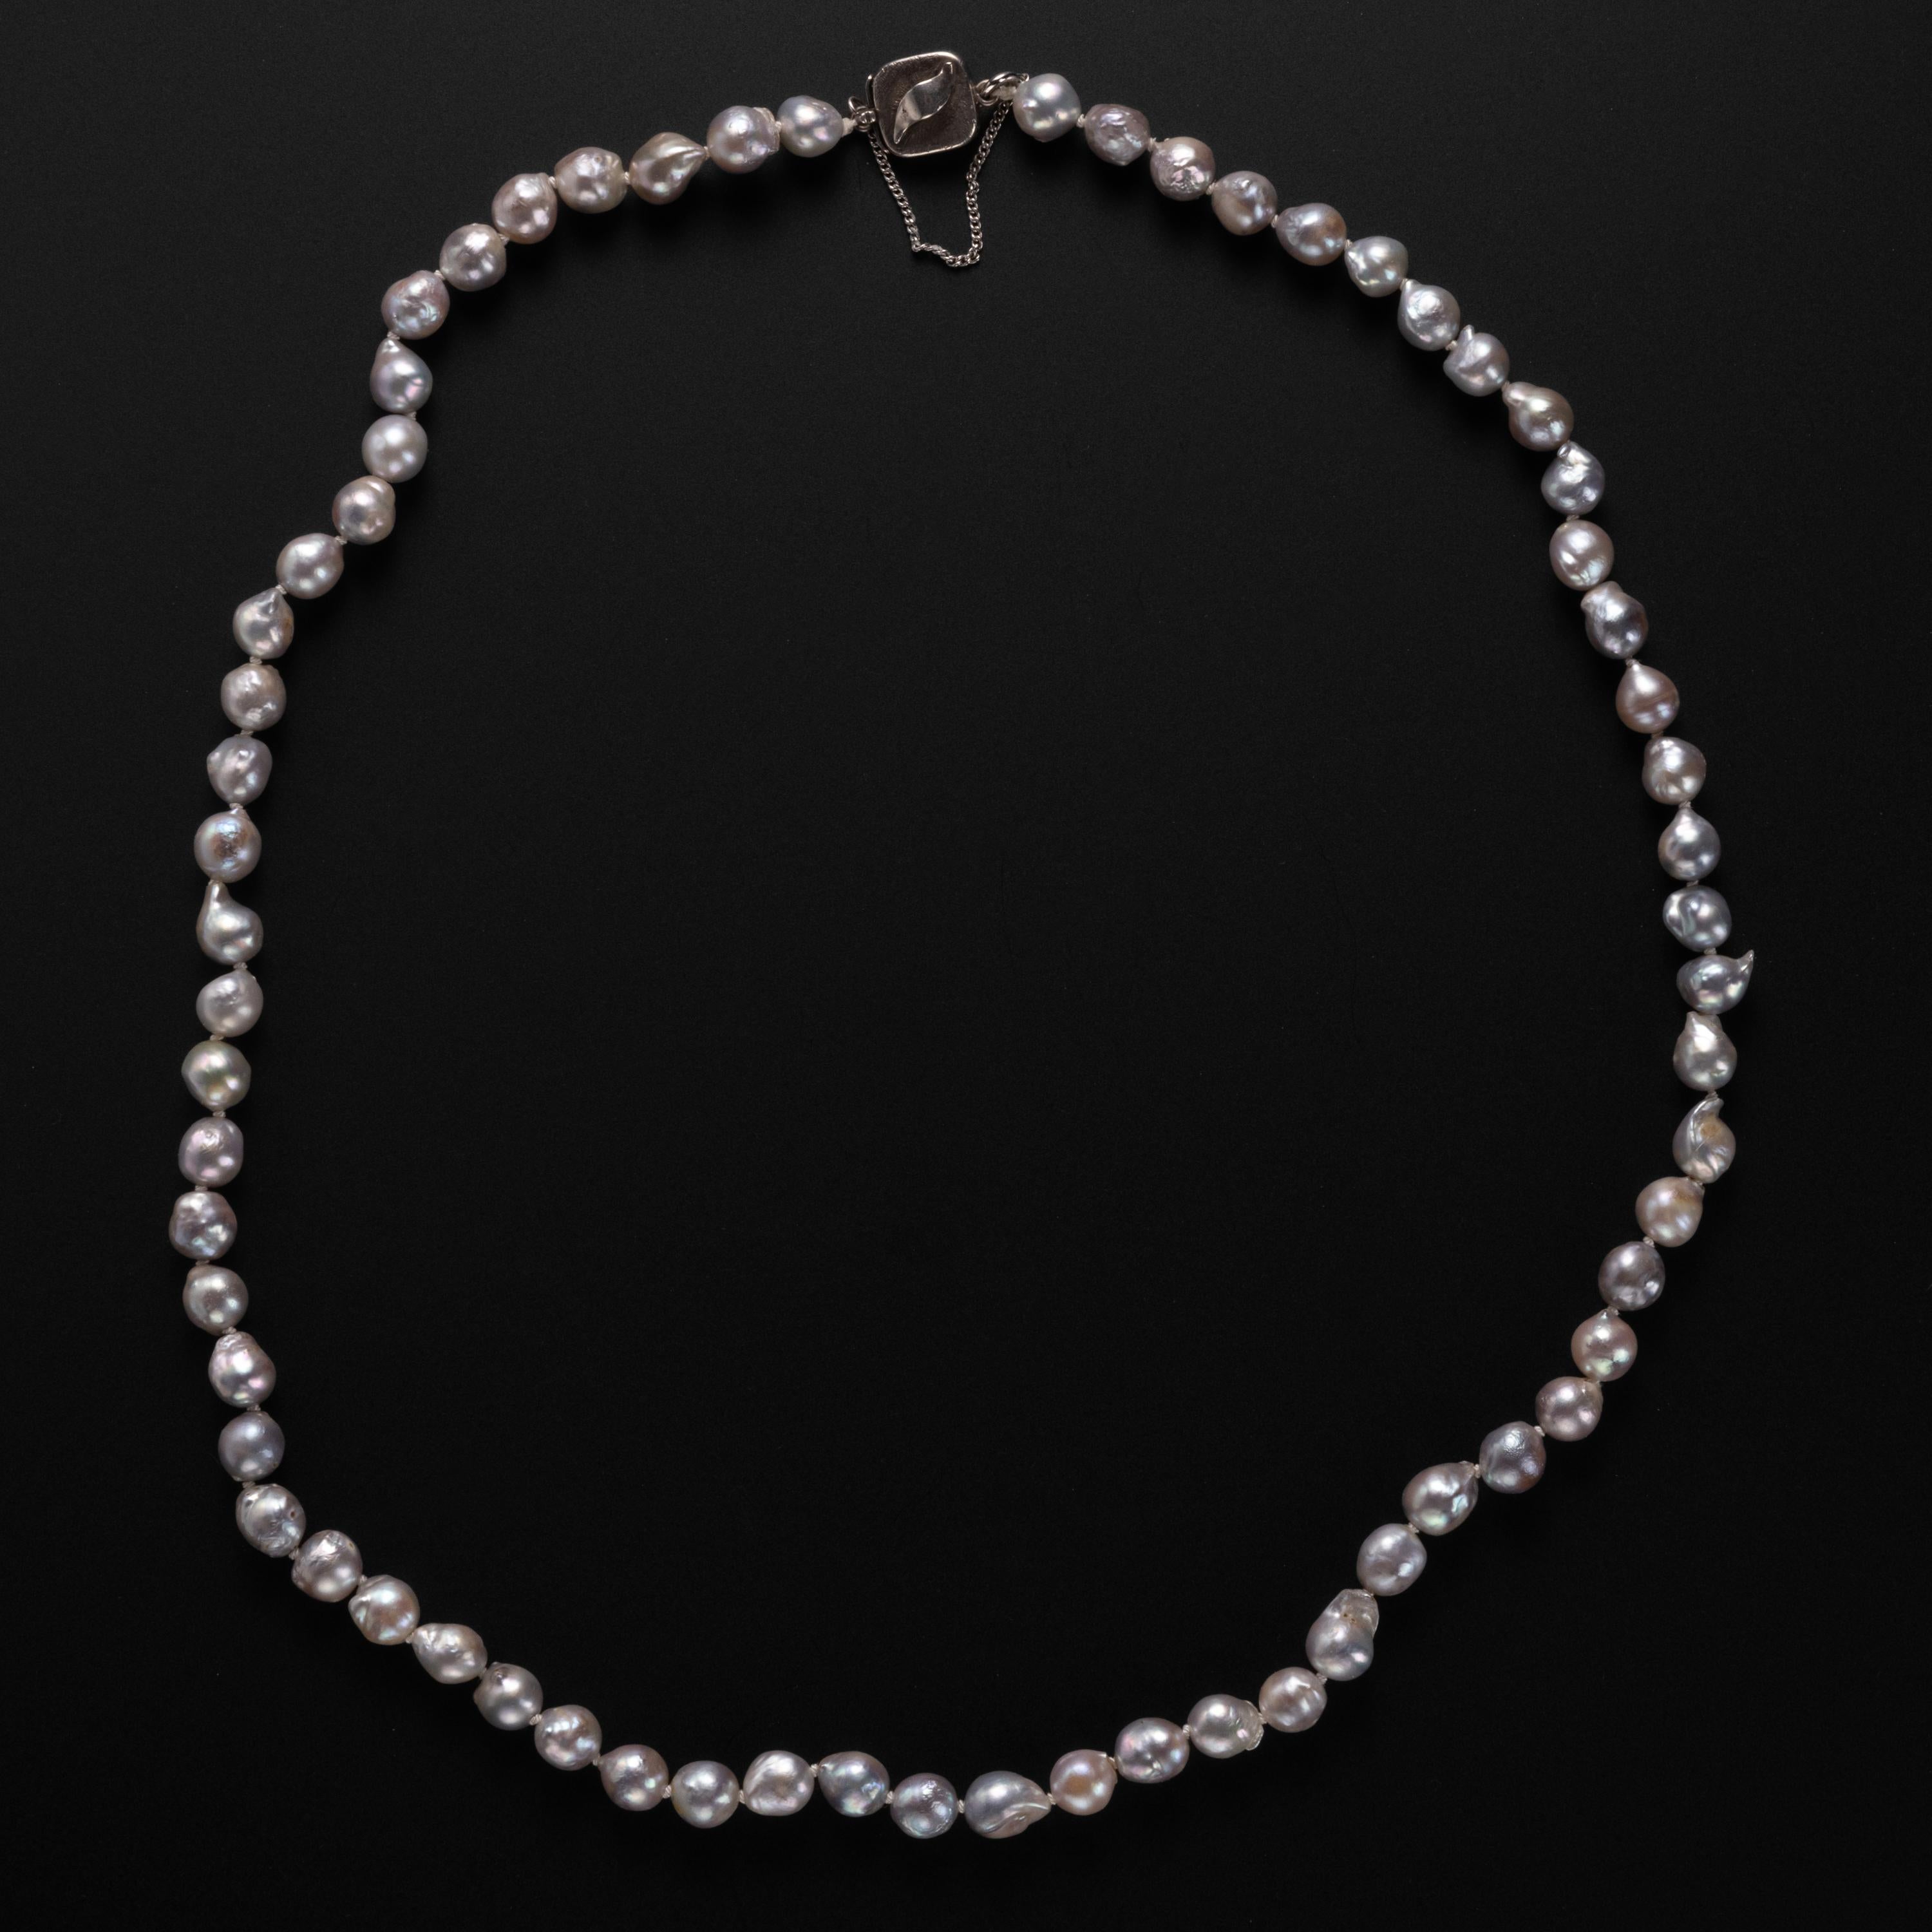 This circa 1970s necklace of silvery-blue cultured baroque Akoya pearls is a gorgeous and unique vintage treasure. These magnificent pearls possess a bright, high luster with a dimpled, rippled surface that makes them undulate with luminous beauty.